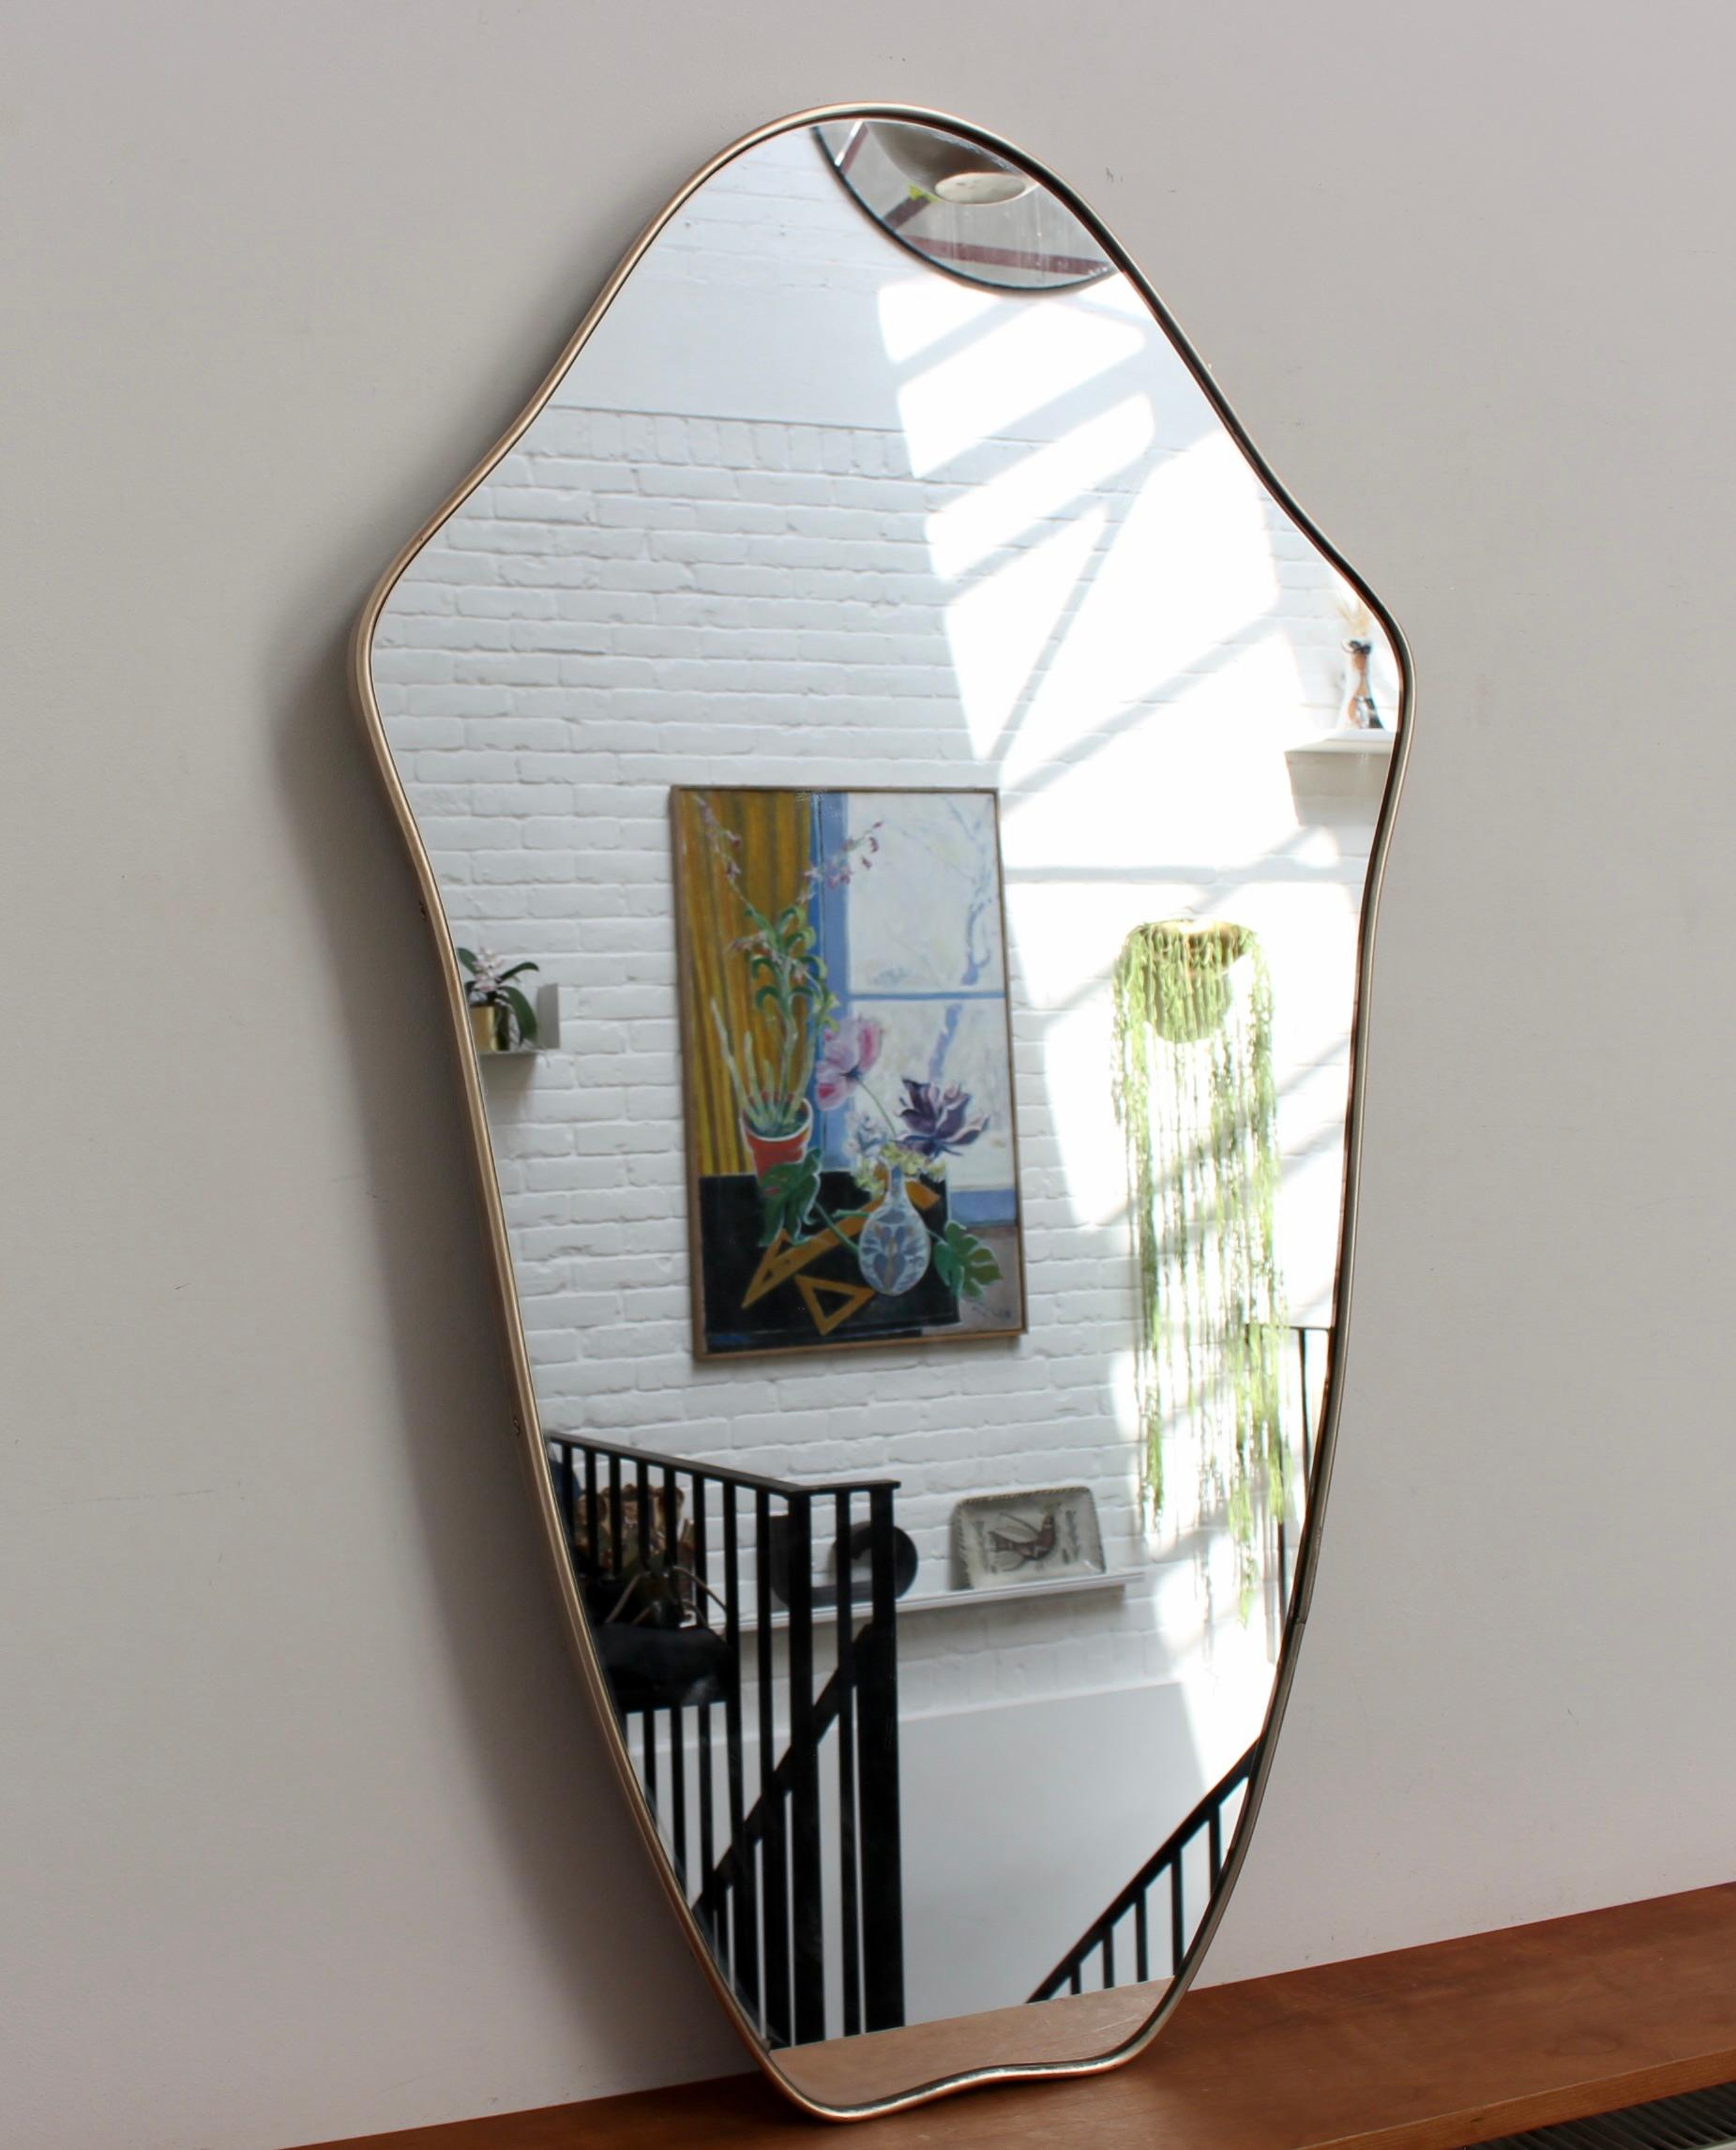 Midcentury Italian wall mirror with brass frame (circa 1950s). The mirror is classically-shaped and distinctive in a Modern style. A beautiful patina develops on the brass frame - this one has been recently polished. There is a sturdy backing